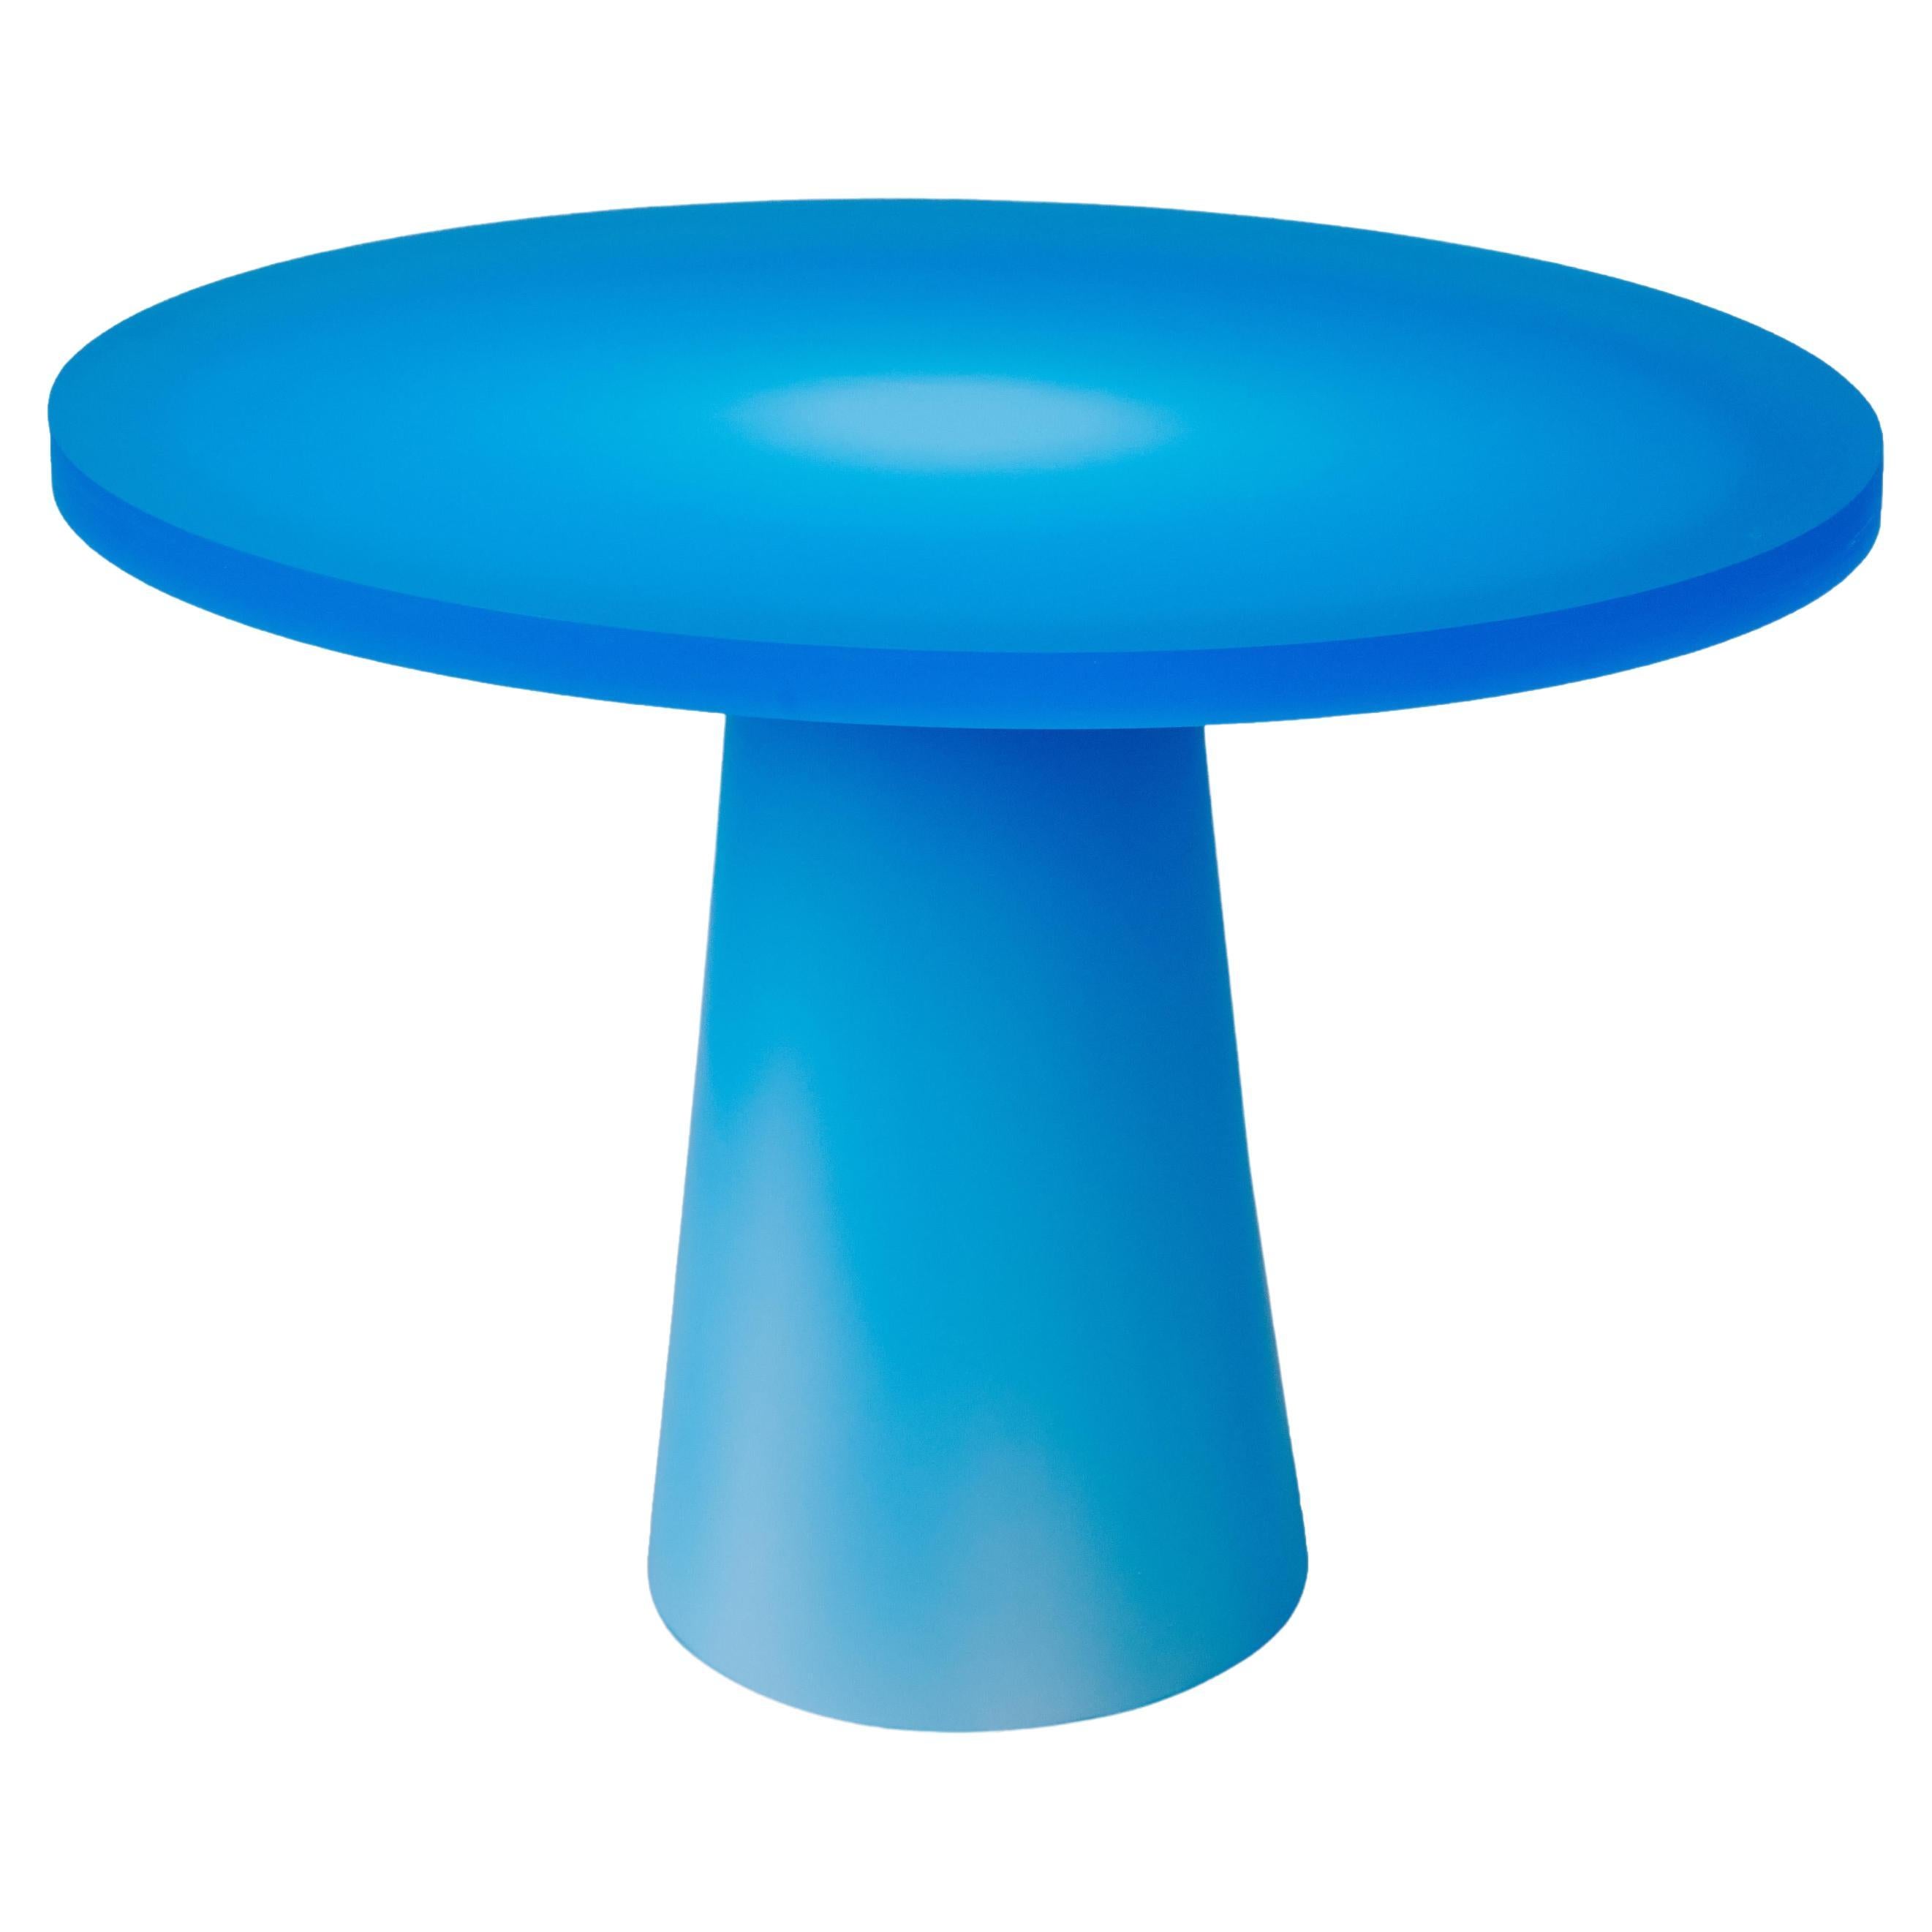 Elliptical Entry Resin Table in Blue by Facture Studio, REP by Tuleste Factory For Sale